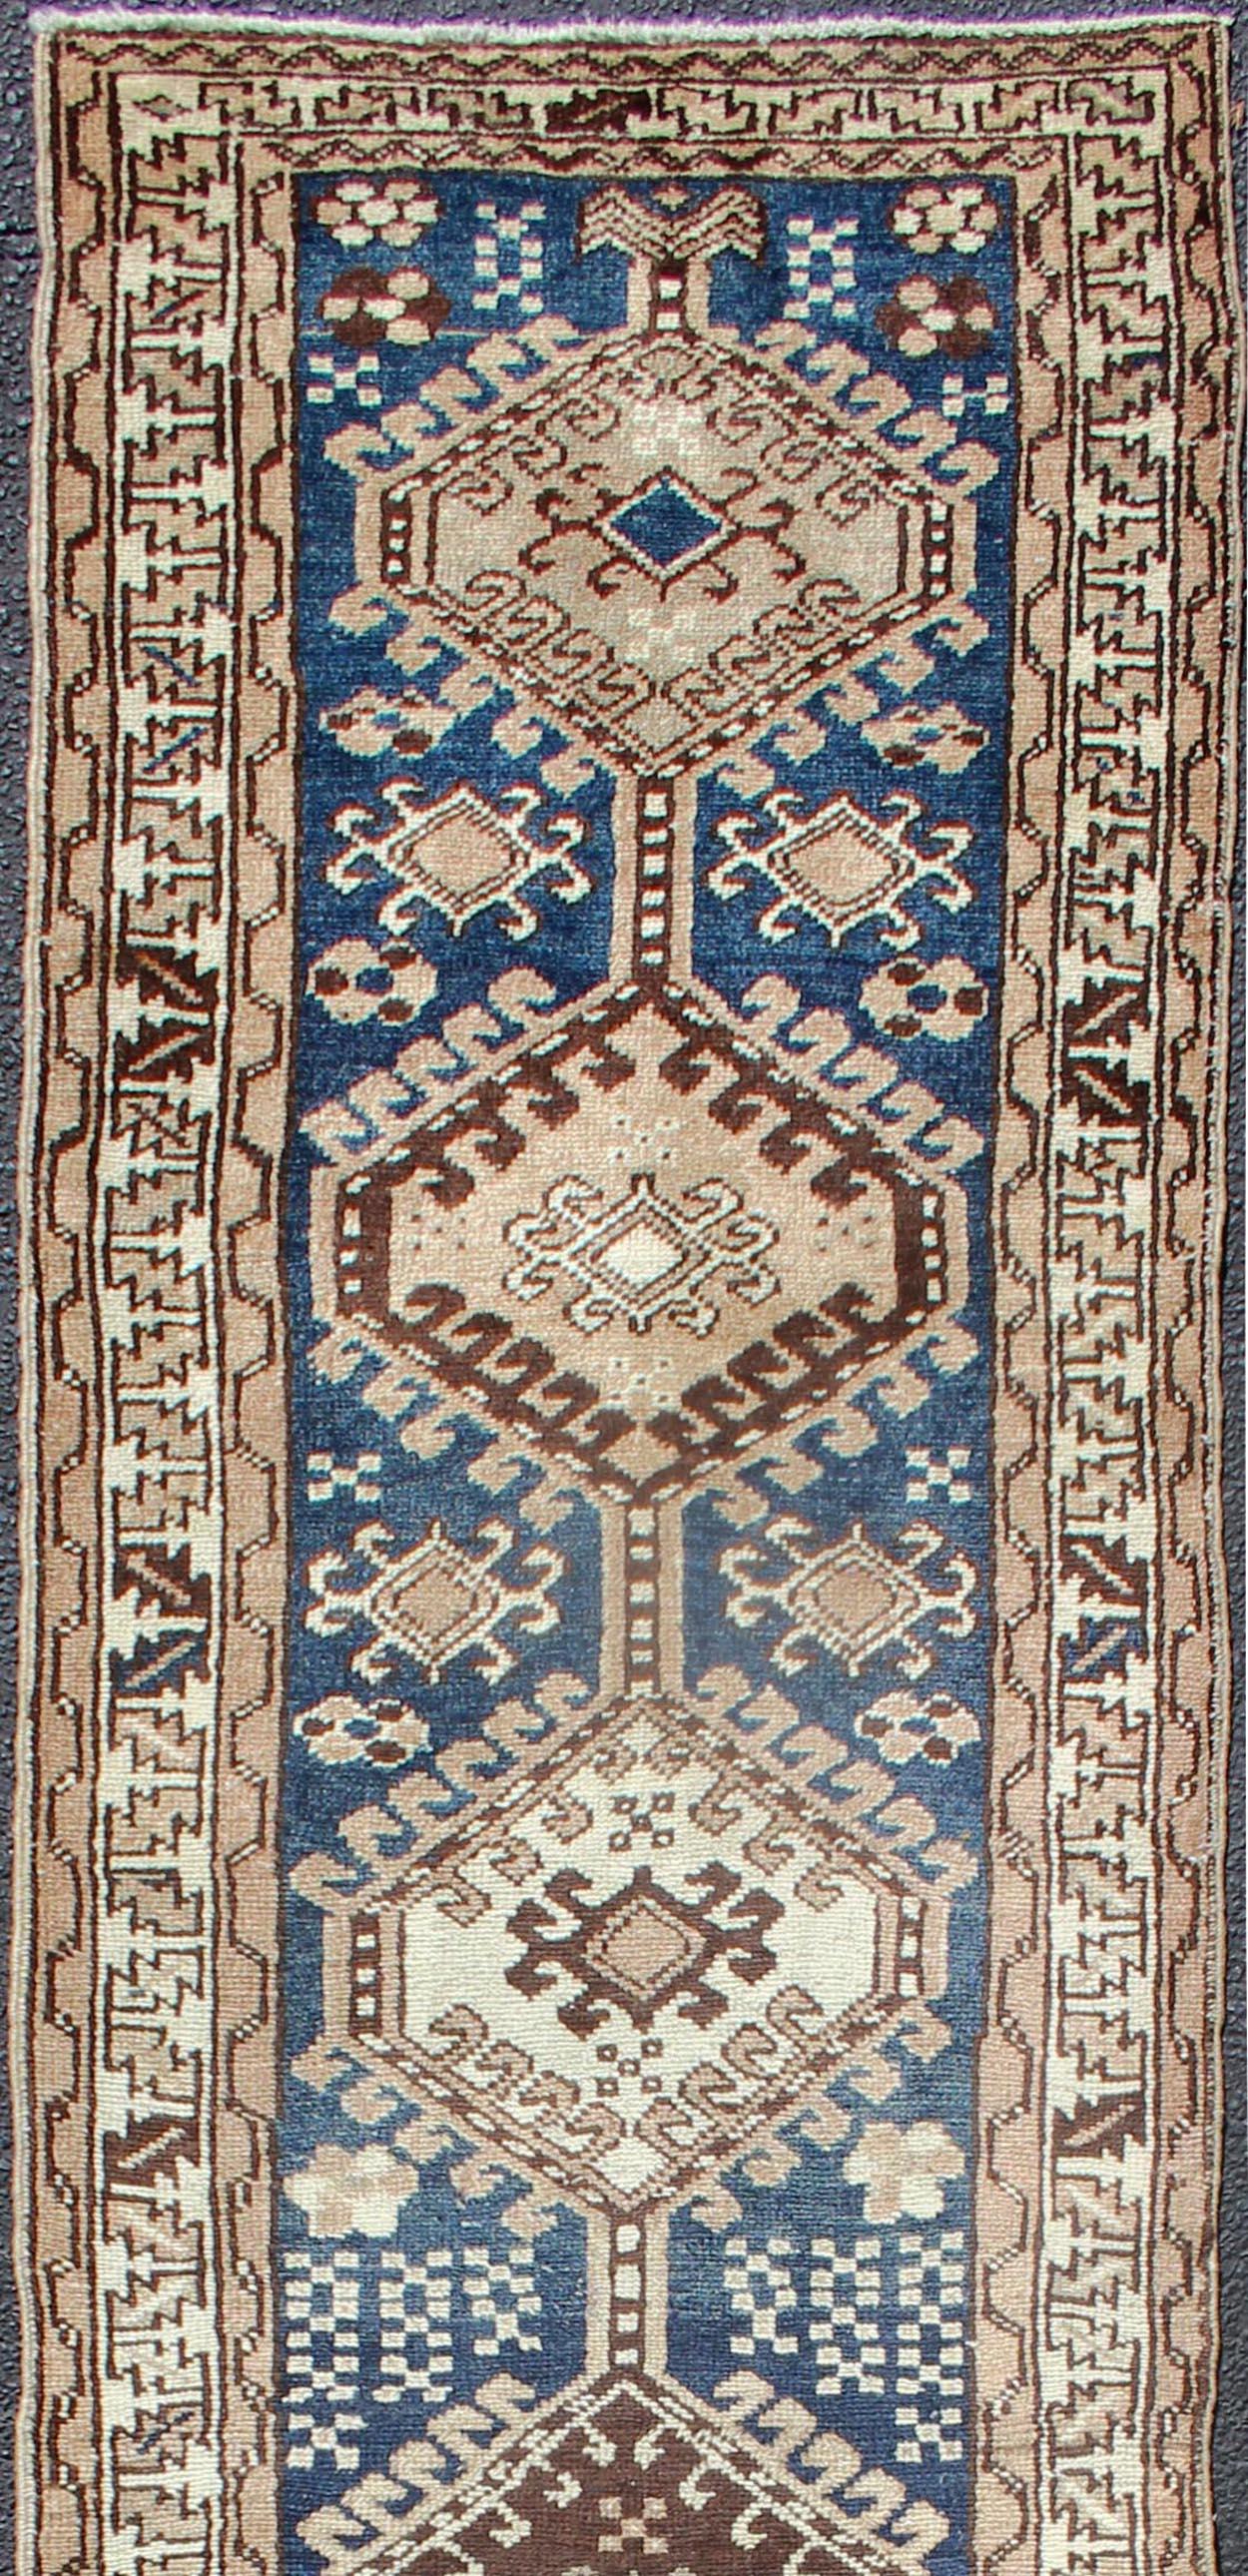 Antique Persian Karajeh runner with stacked medallion in taupe, cream, blue, rug PRM-M522, country of origin / type: Iran / Karajeh, circa 1920

This antique Persian karajeh runner from early 20th century Iran features a vertical arrangement of